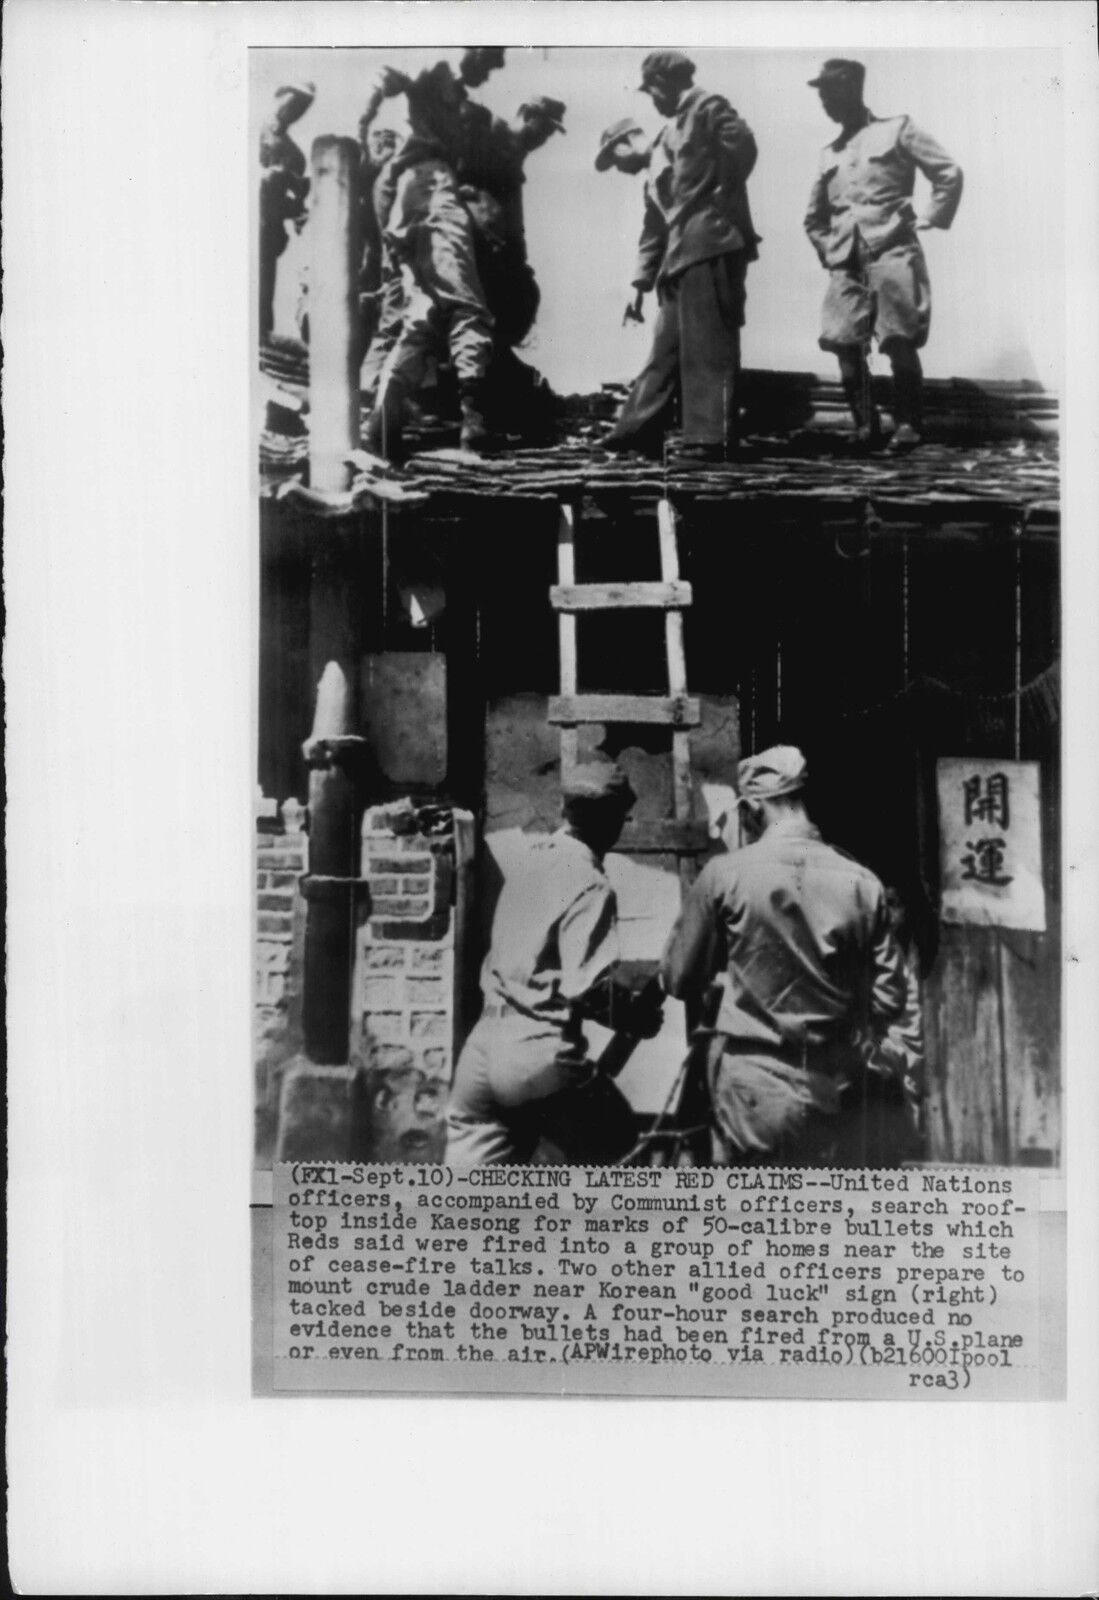 UN Officers Check Roof at Kaesong Peace Conference 1951 Korea War Press Photo Poster painting